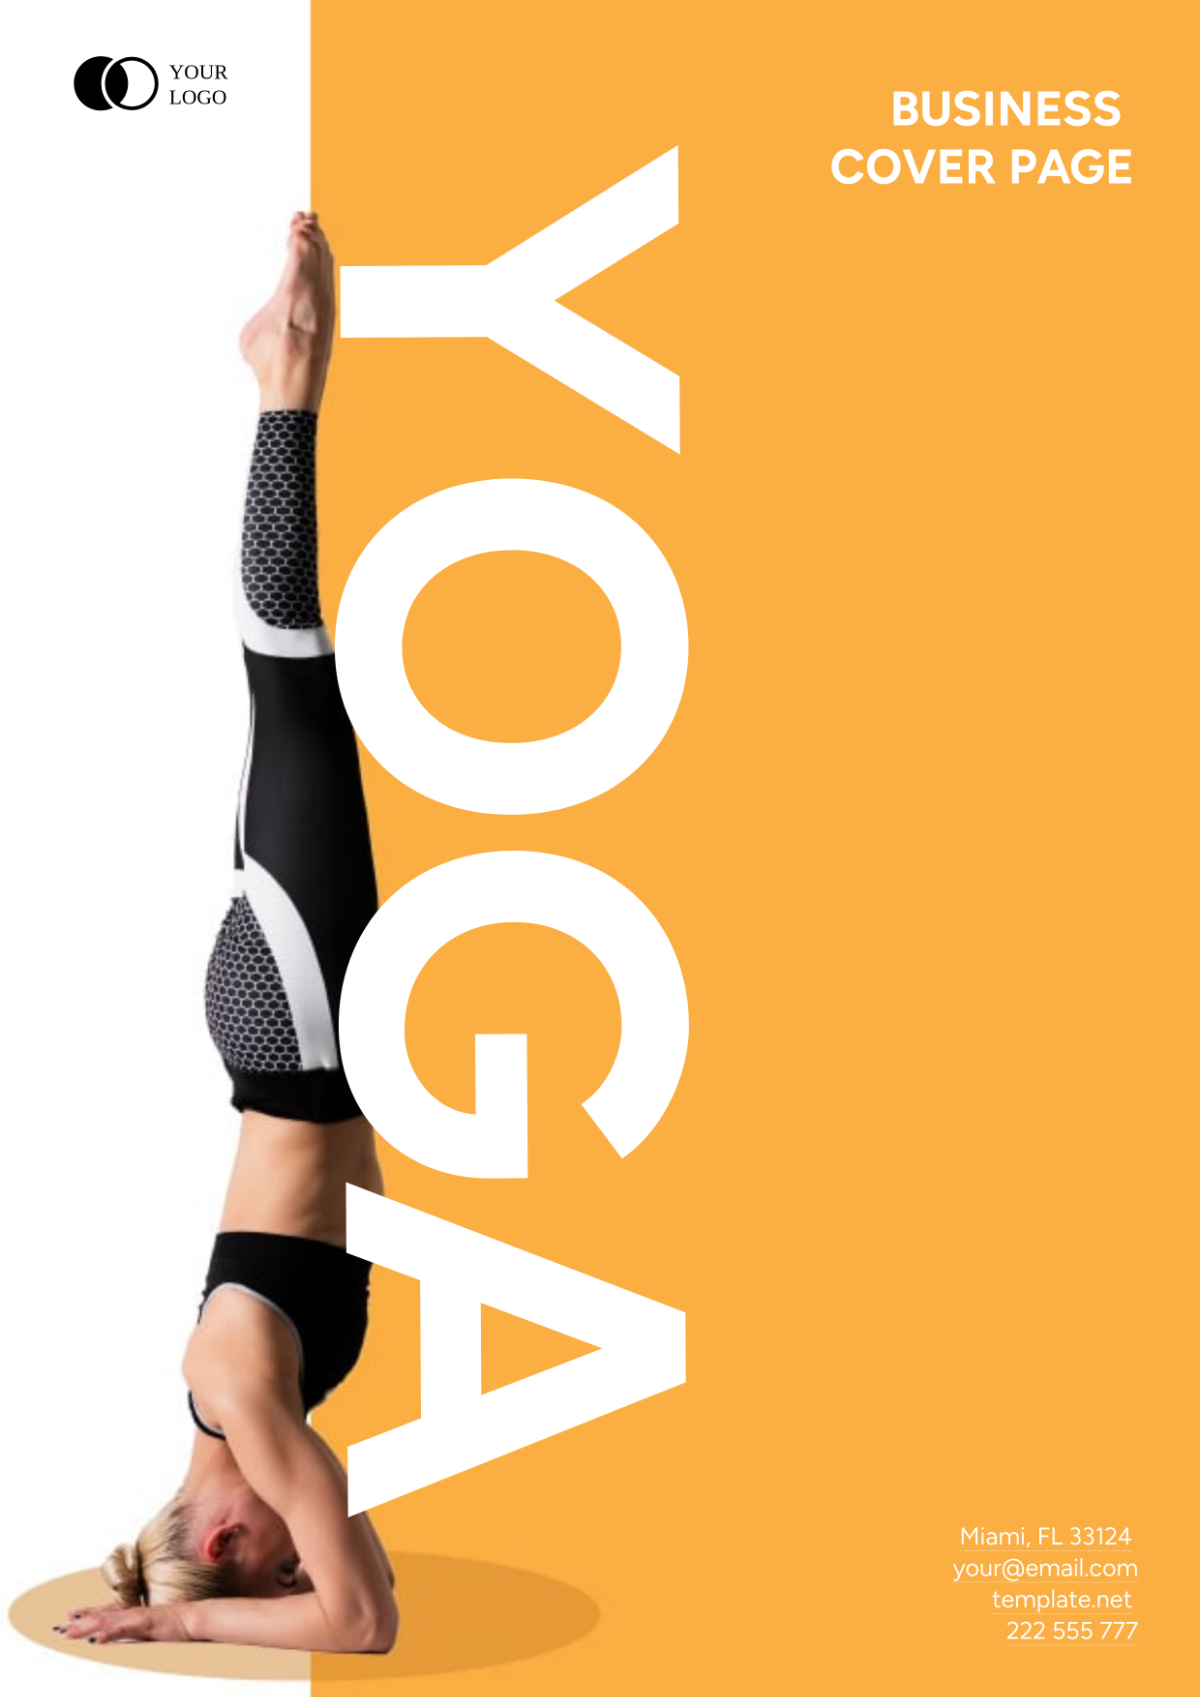 Yoga Studio Business Cover Page Template